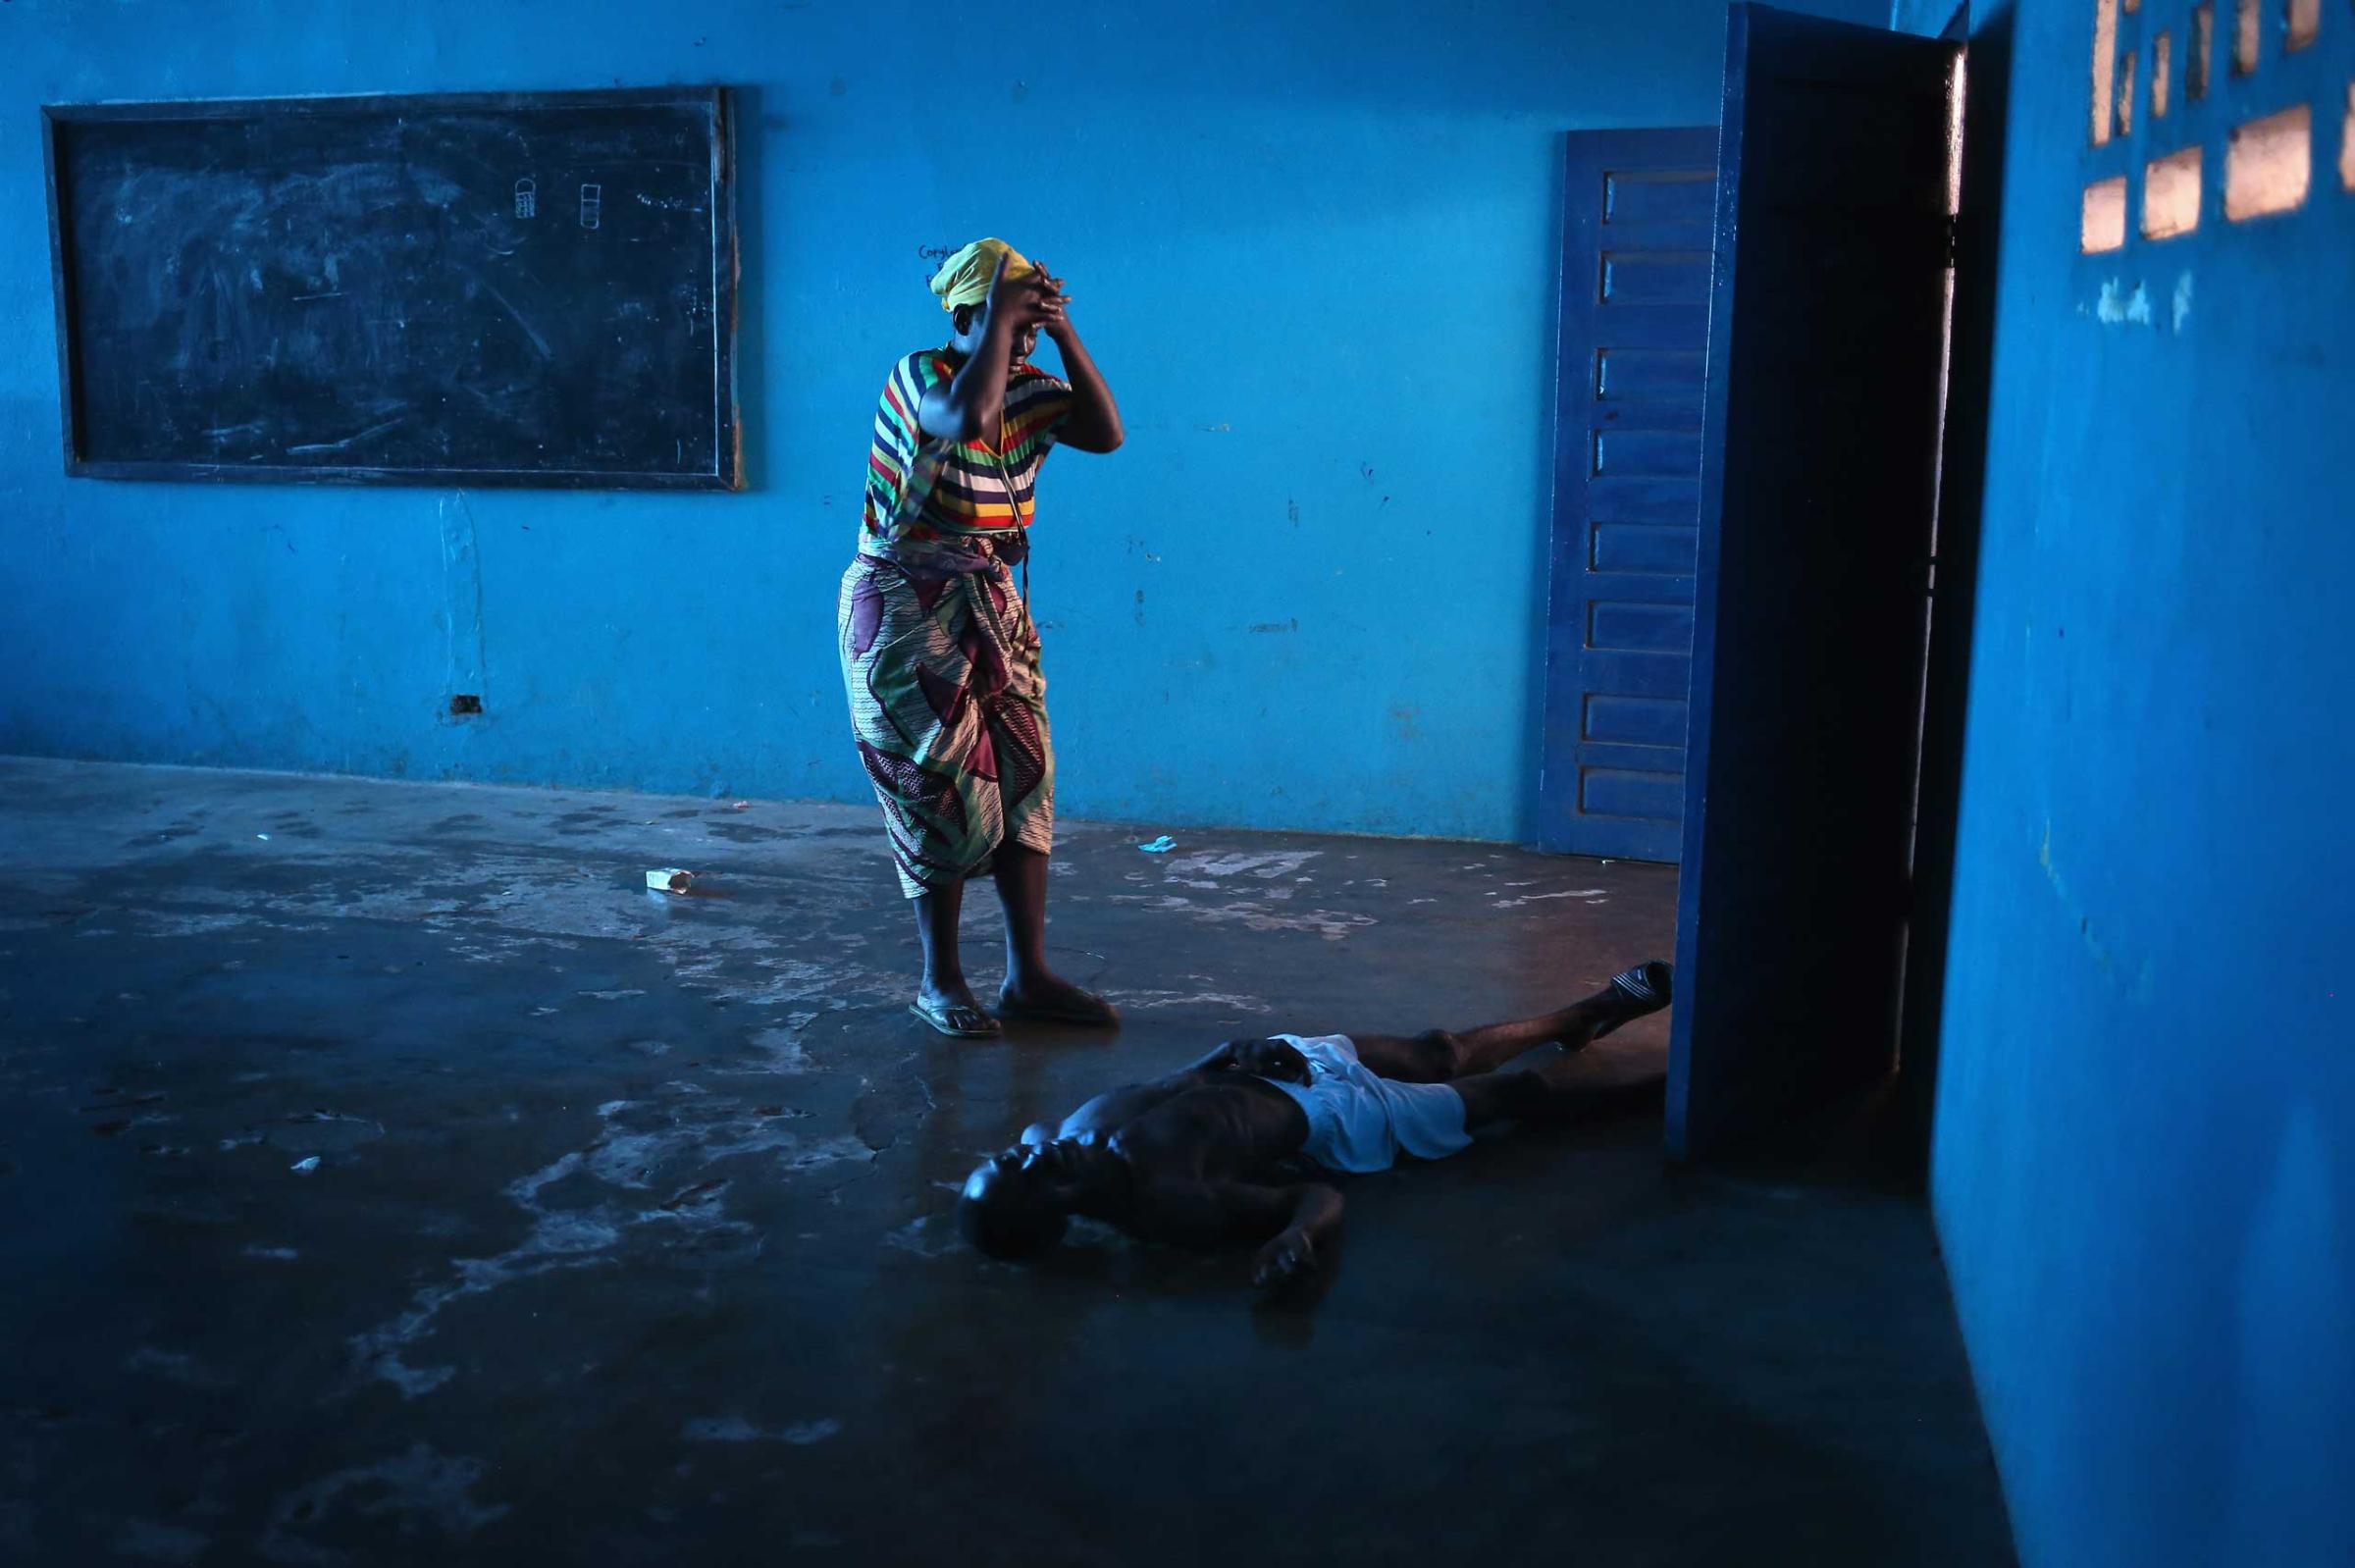 Umu Fambulle stands over her husband Ibrahim after he staggered and fell knocking him unconscious, in an Ebola ward in Monrovia, Liberia., Aug. 15, 2014.